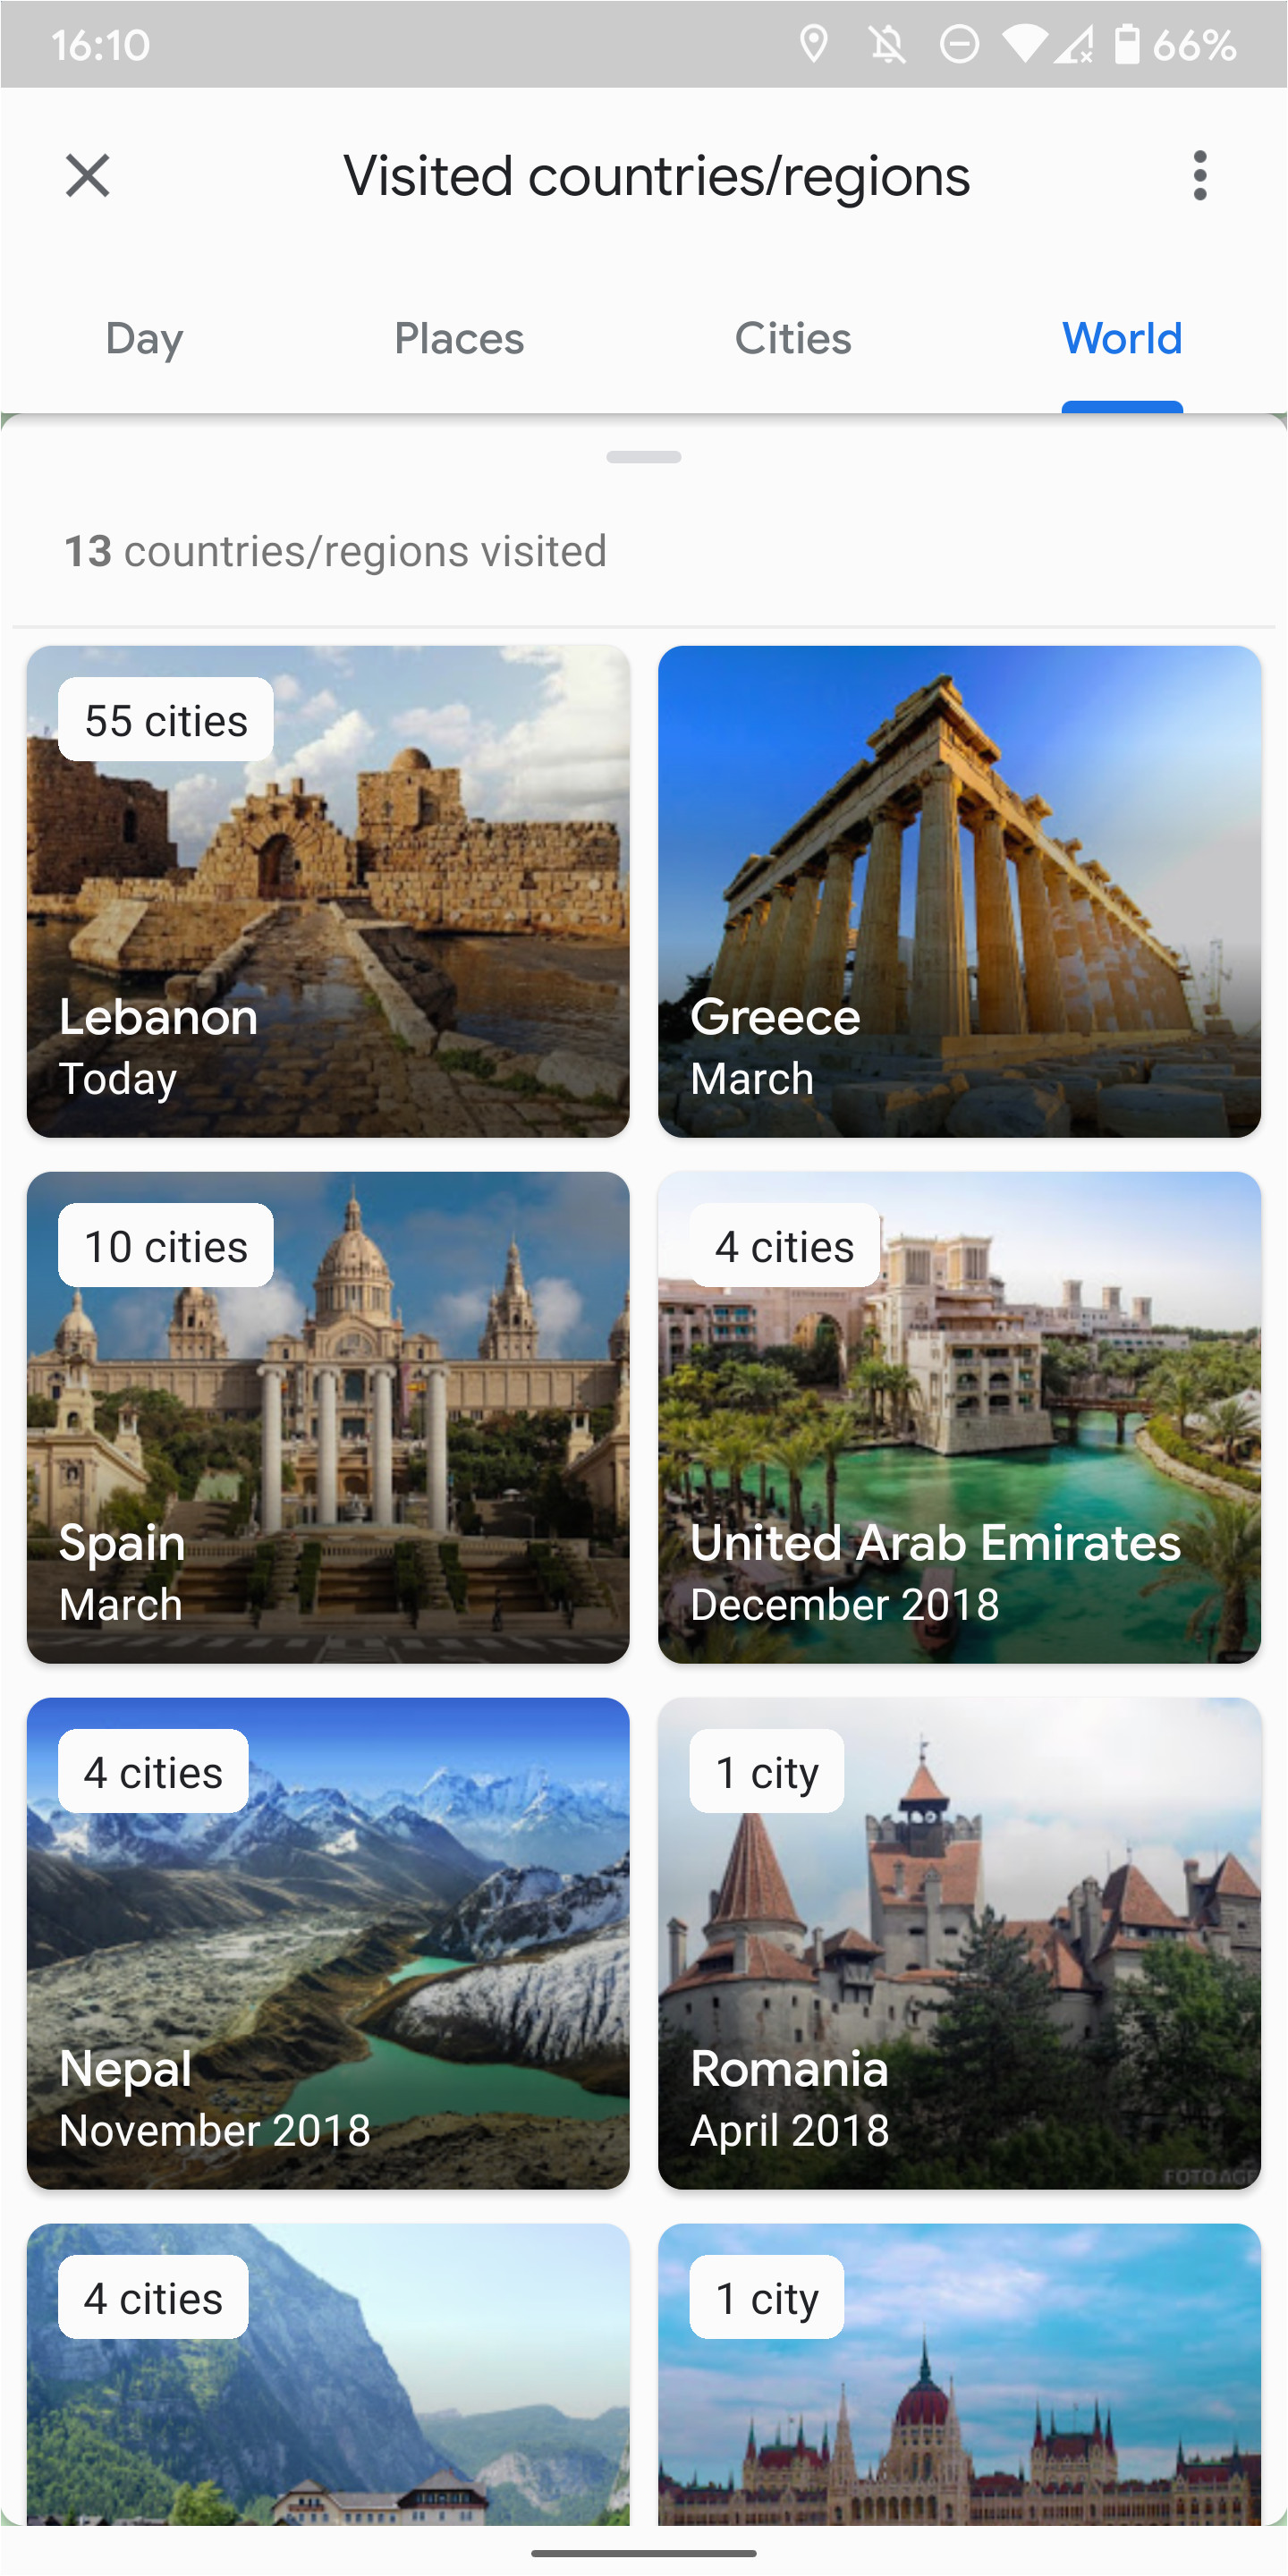 visually enhanced google maps timeline groups visited places by